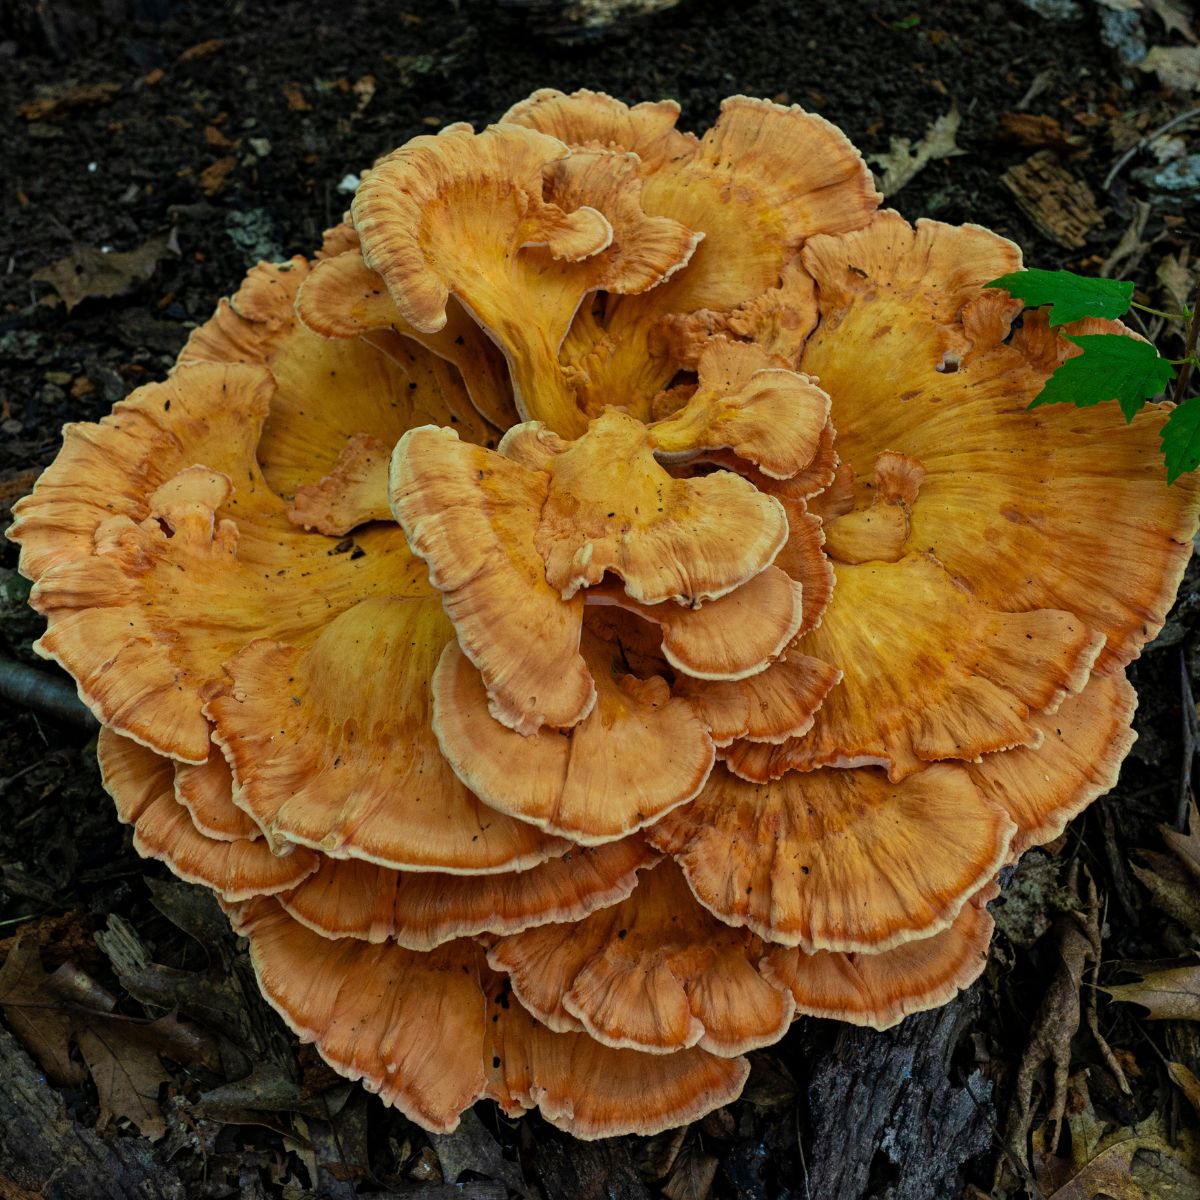 This is chicken of the woods.